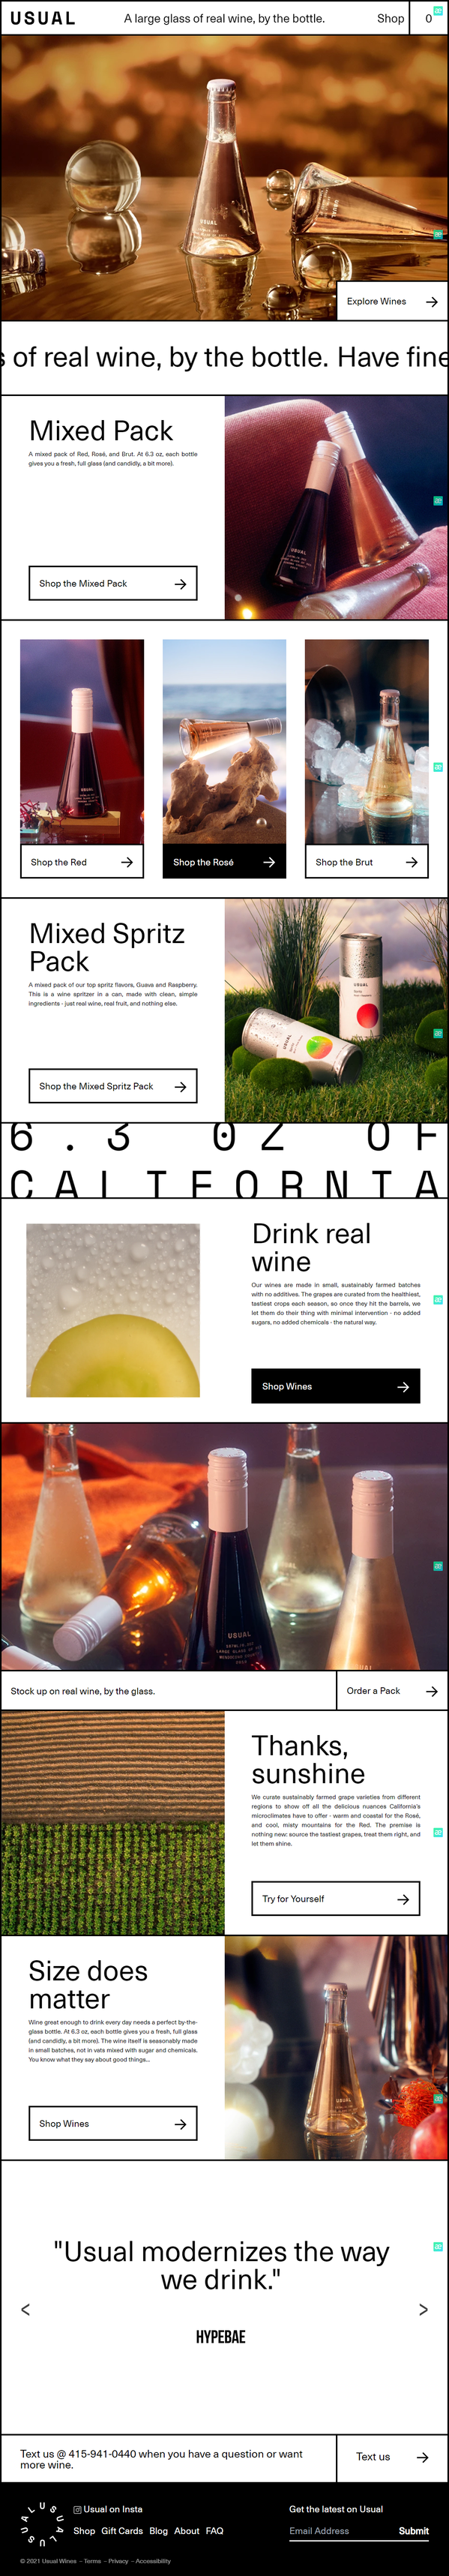 - Usual wines - usualwines.com.png